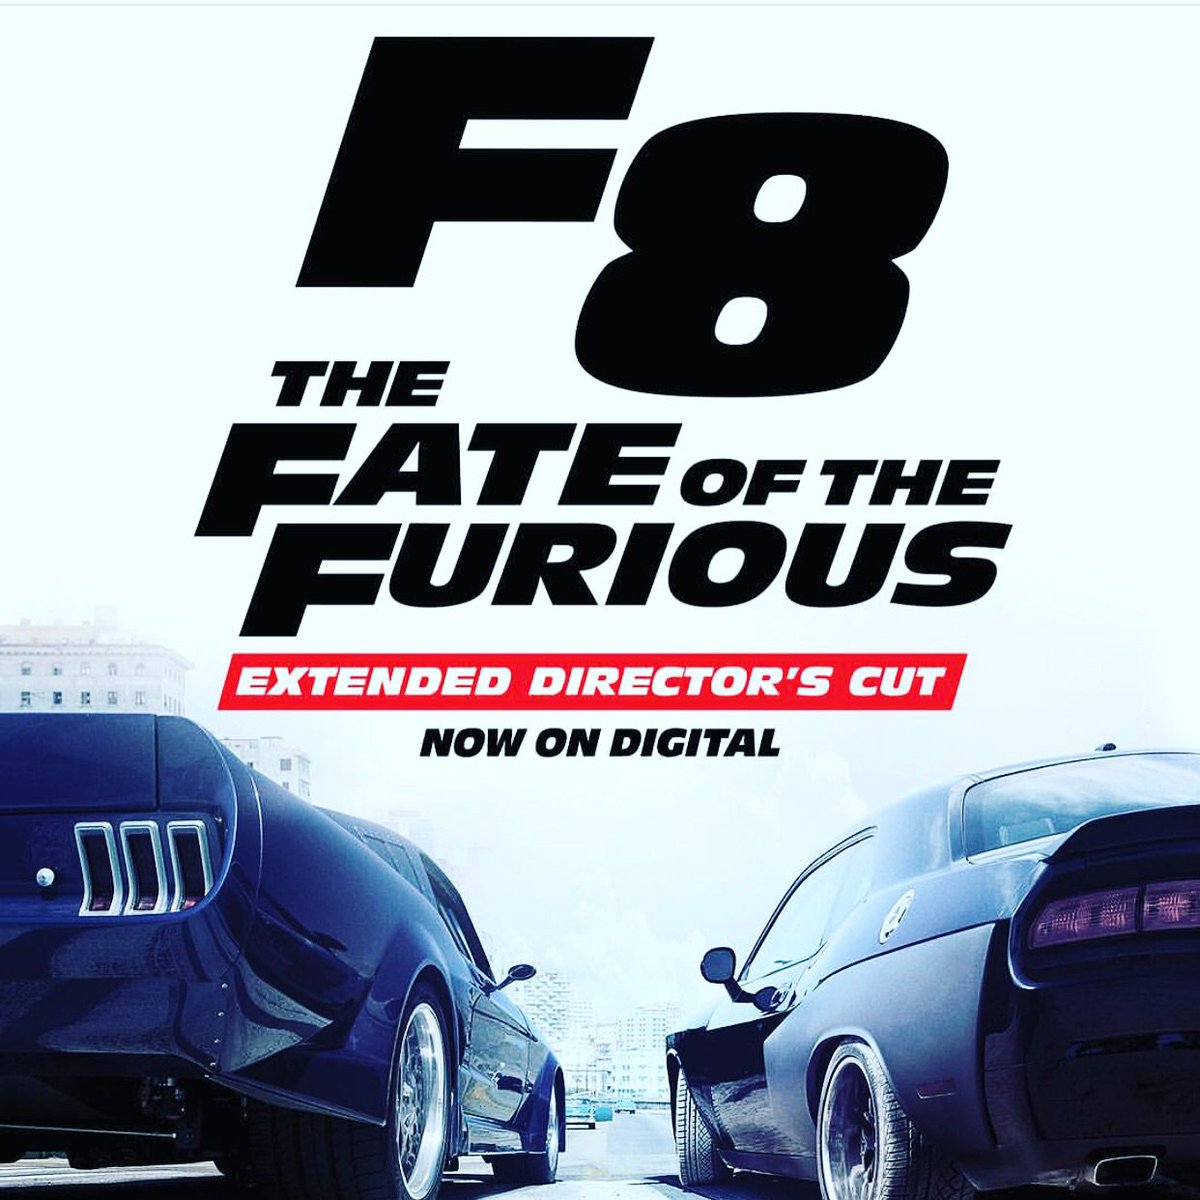 Own the Extended Director’s Cut of Fate of the Furious TODAY on Digital https://t.co/QqxWLwvpJ6 https://t.co/eMUIRw54am